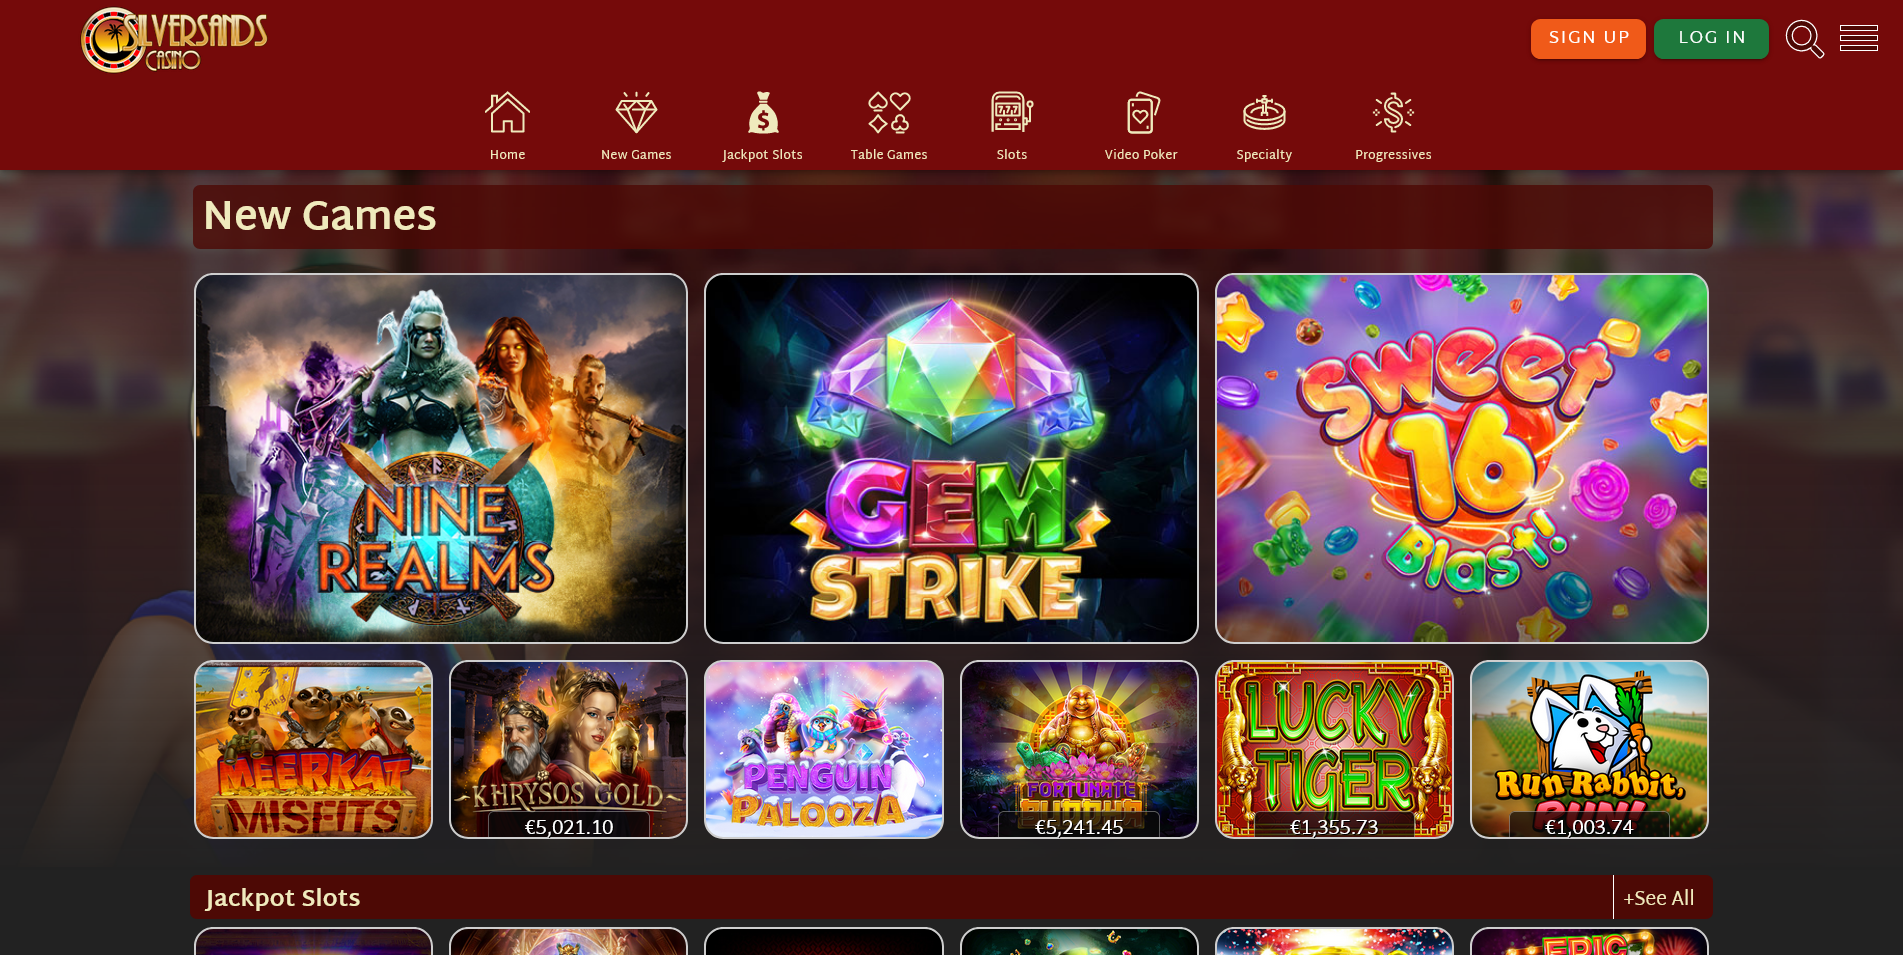 Screenshot of Game Section Page on SilverSands Casino site